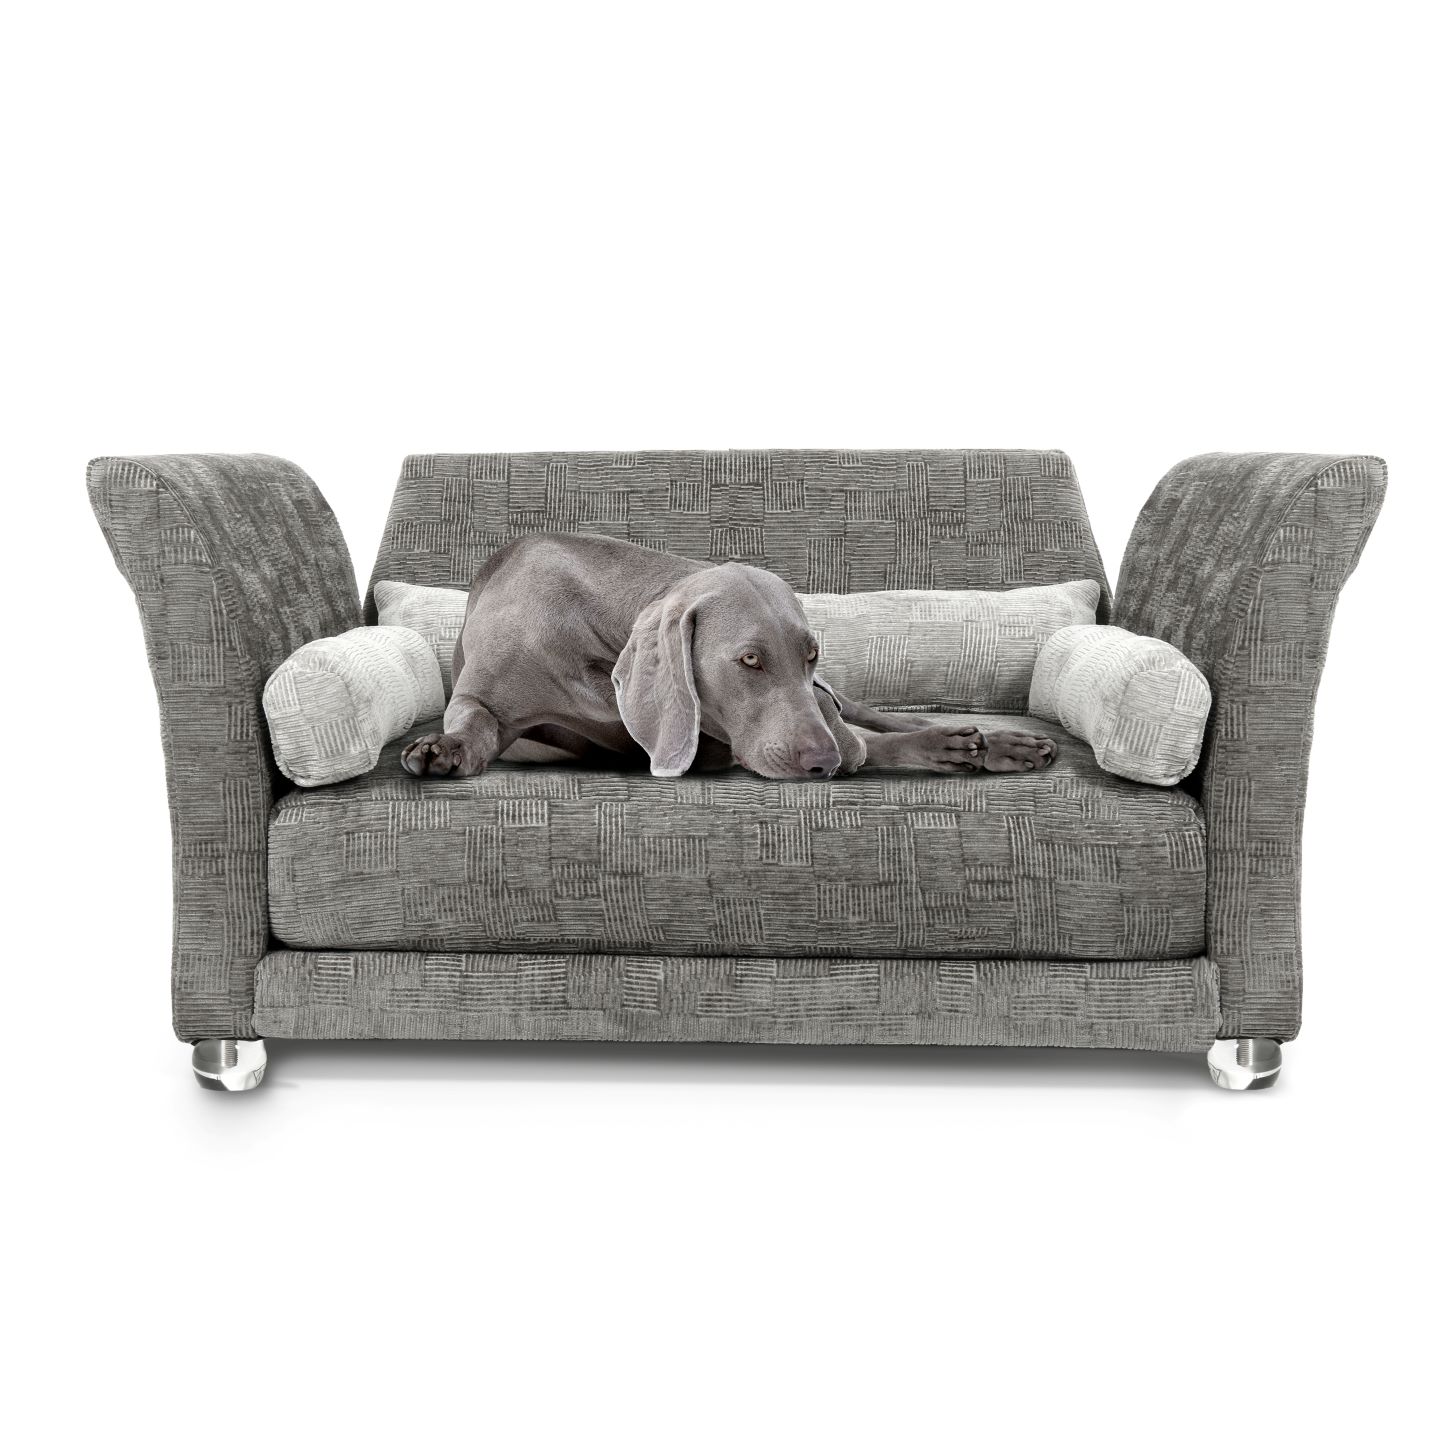 Lusso Orthopedic Dog Bed From Urban Modern Collect